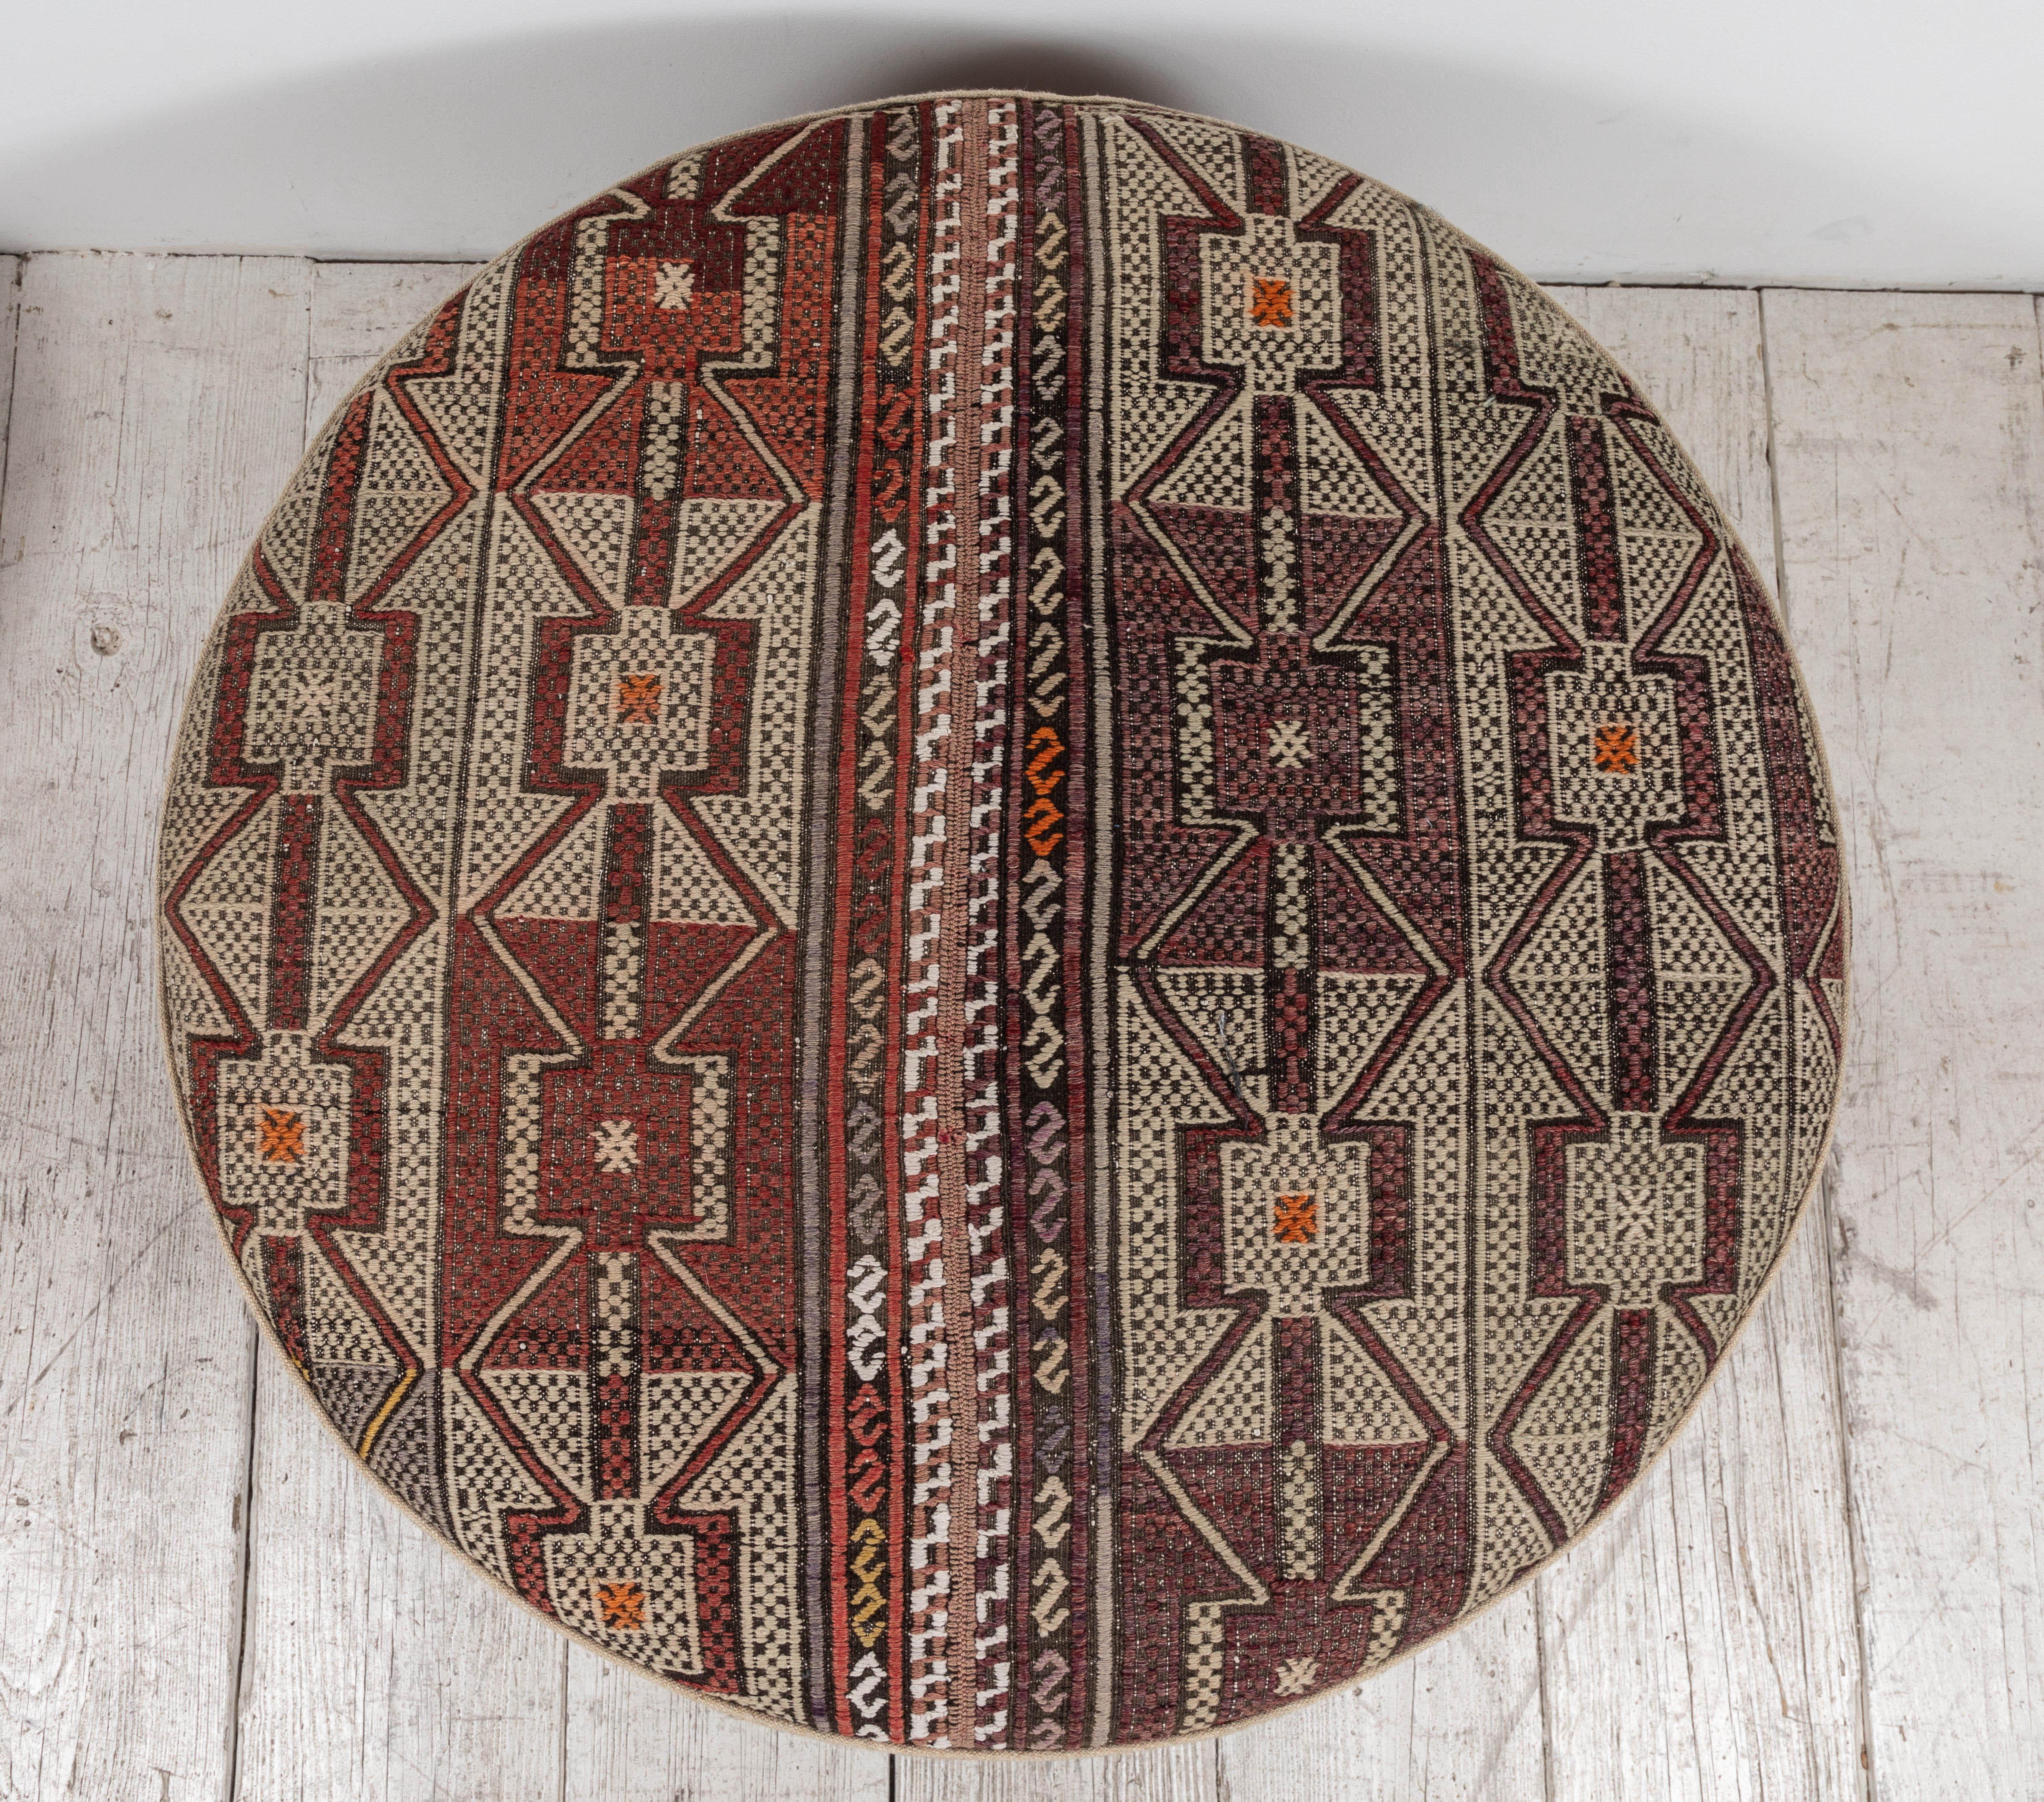 Contemporary Nickey Kehoe Collection Large Round Ottoman Upholstered in Vintage Rug Textile